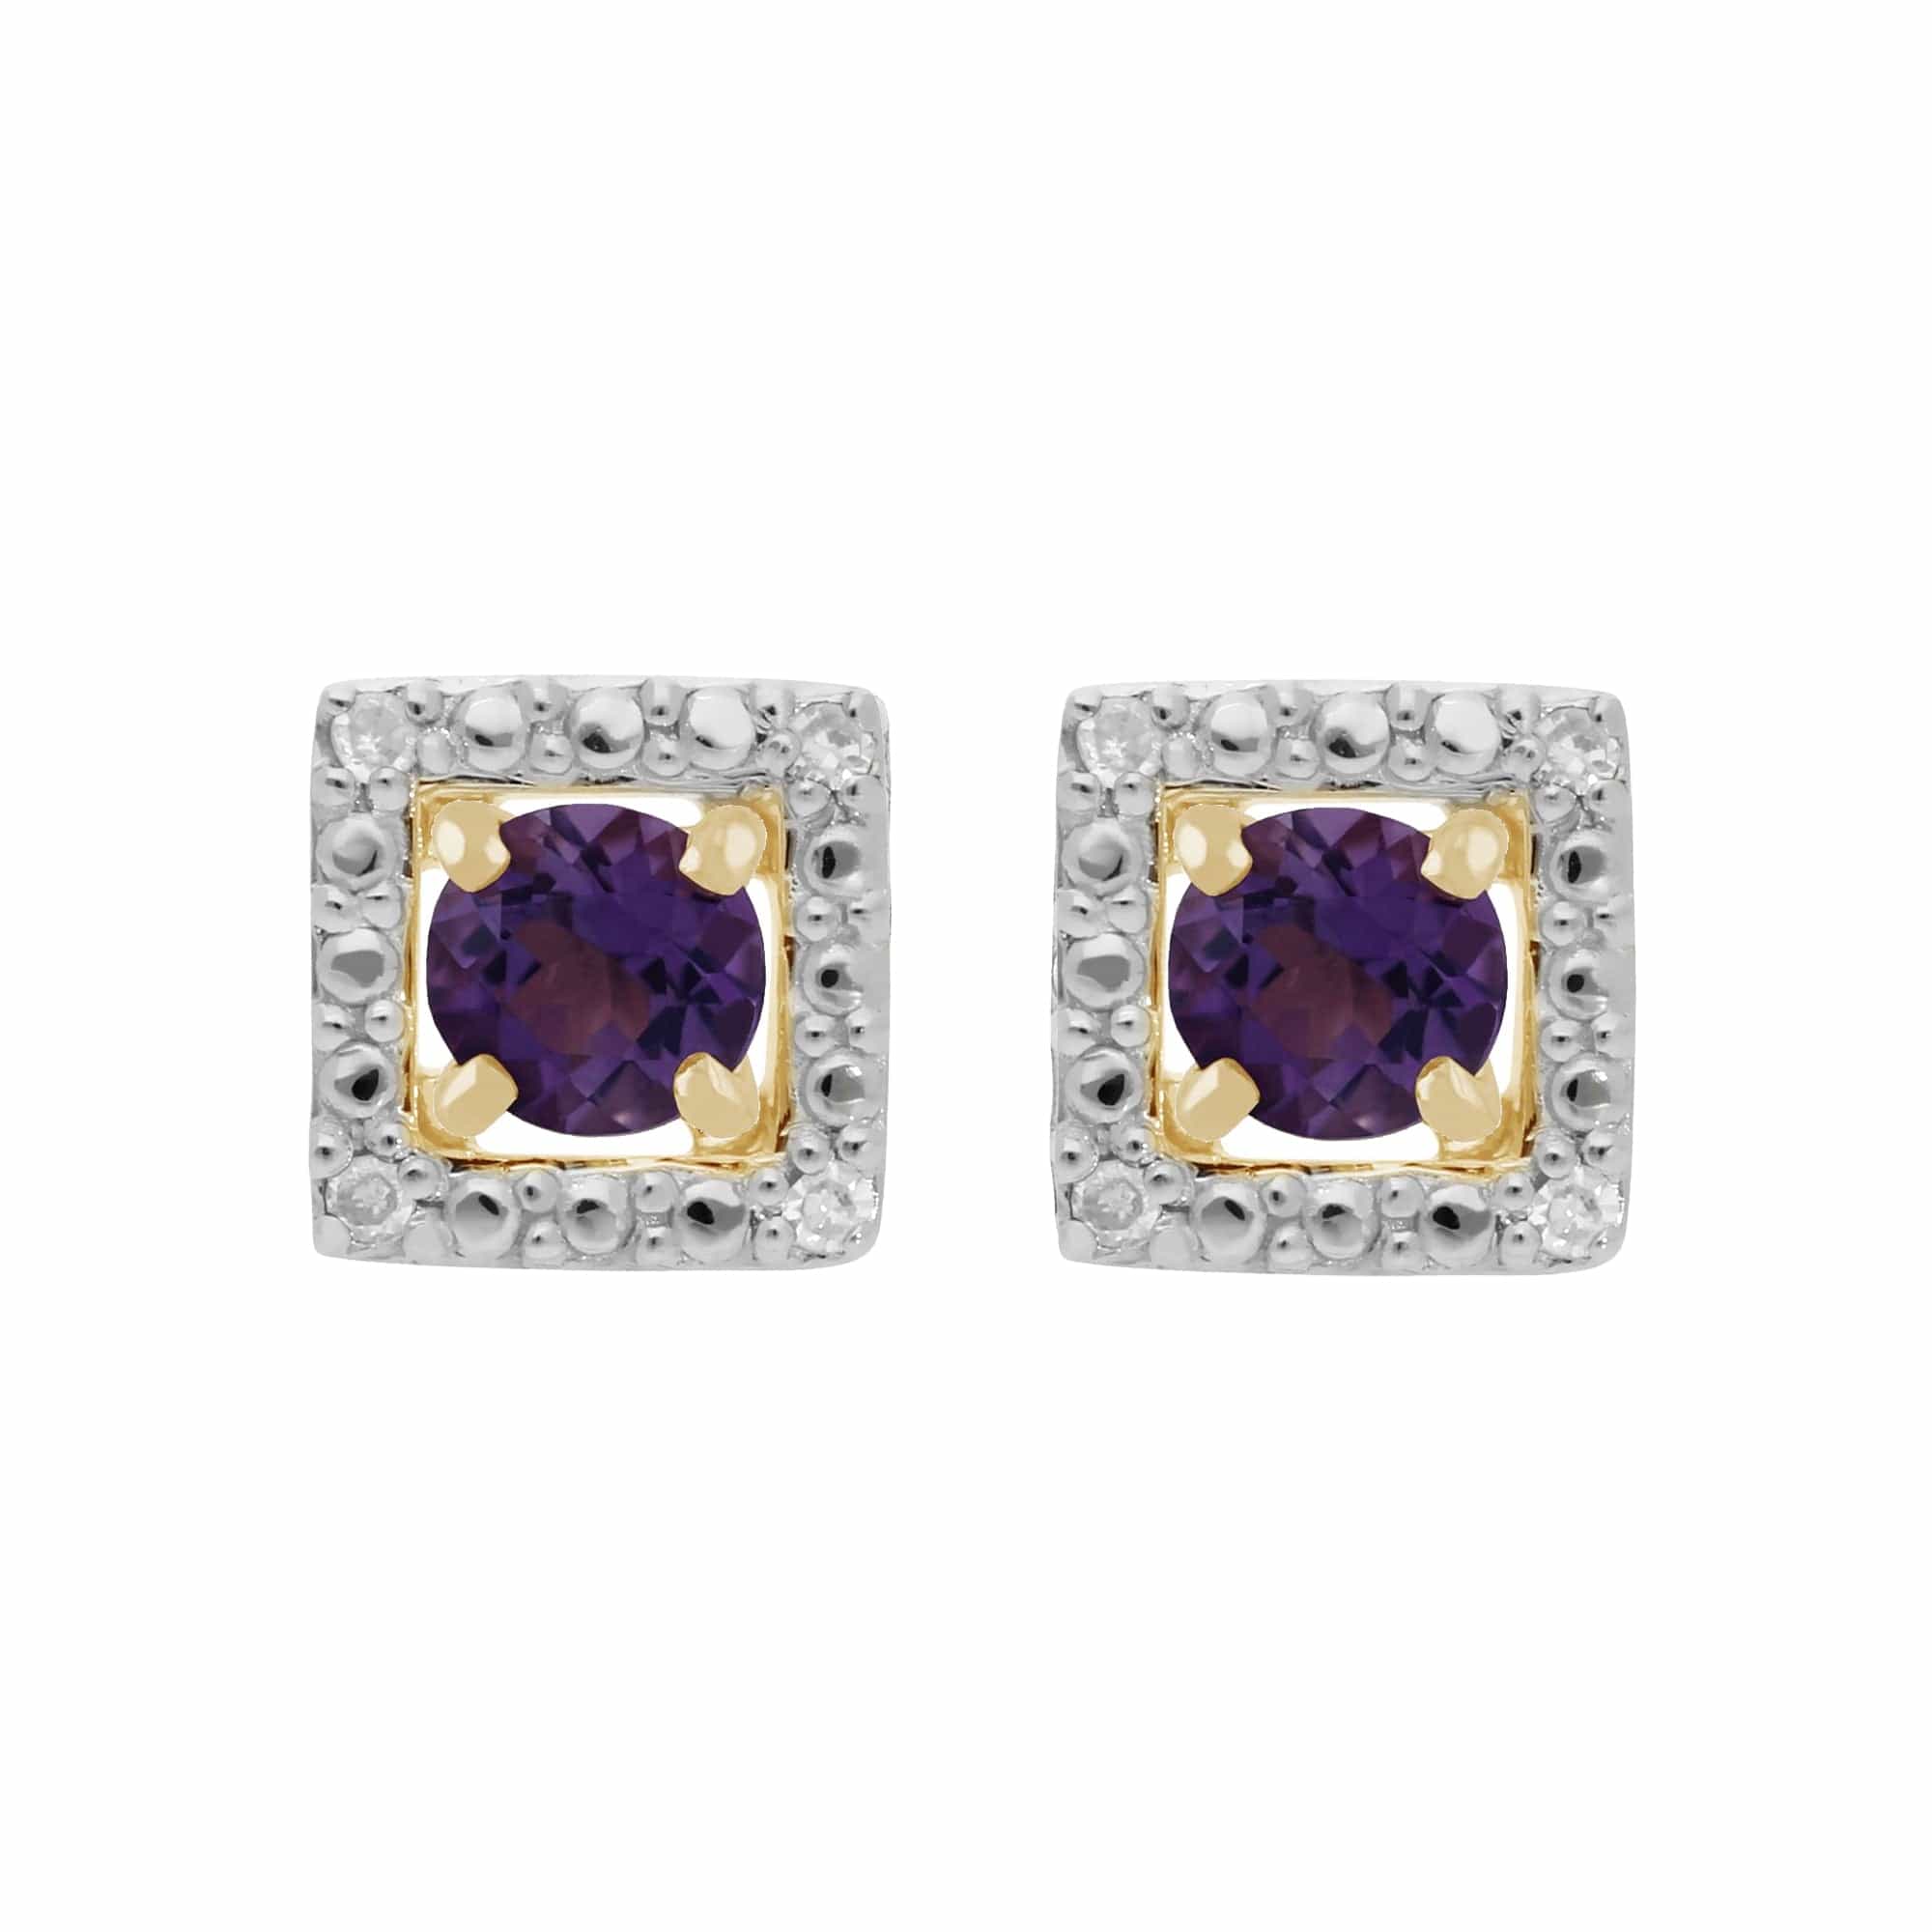 11560-191E0379019 Classic Round Amethyst Stud Earrings with Detachable Diamond Square Earrings Jacket Set in 9ct Yellow Gold 1